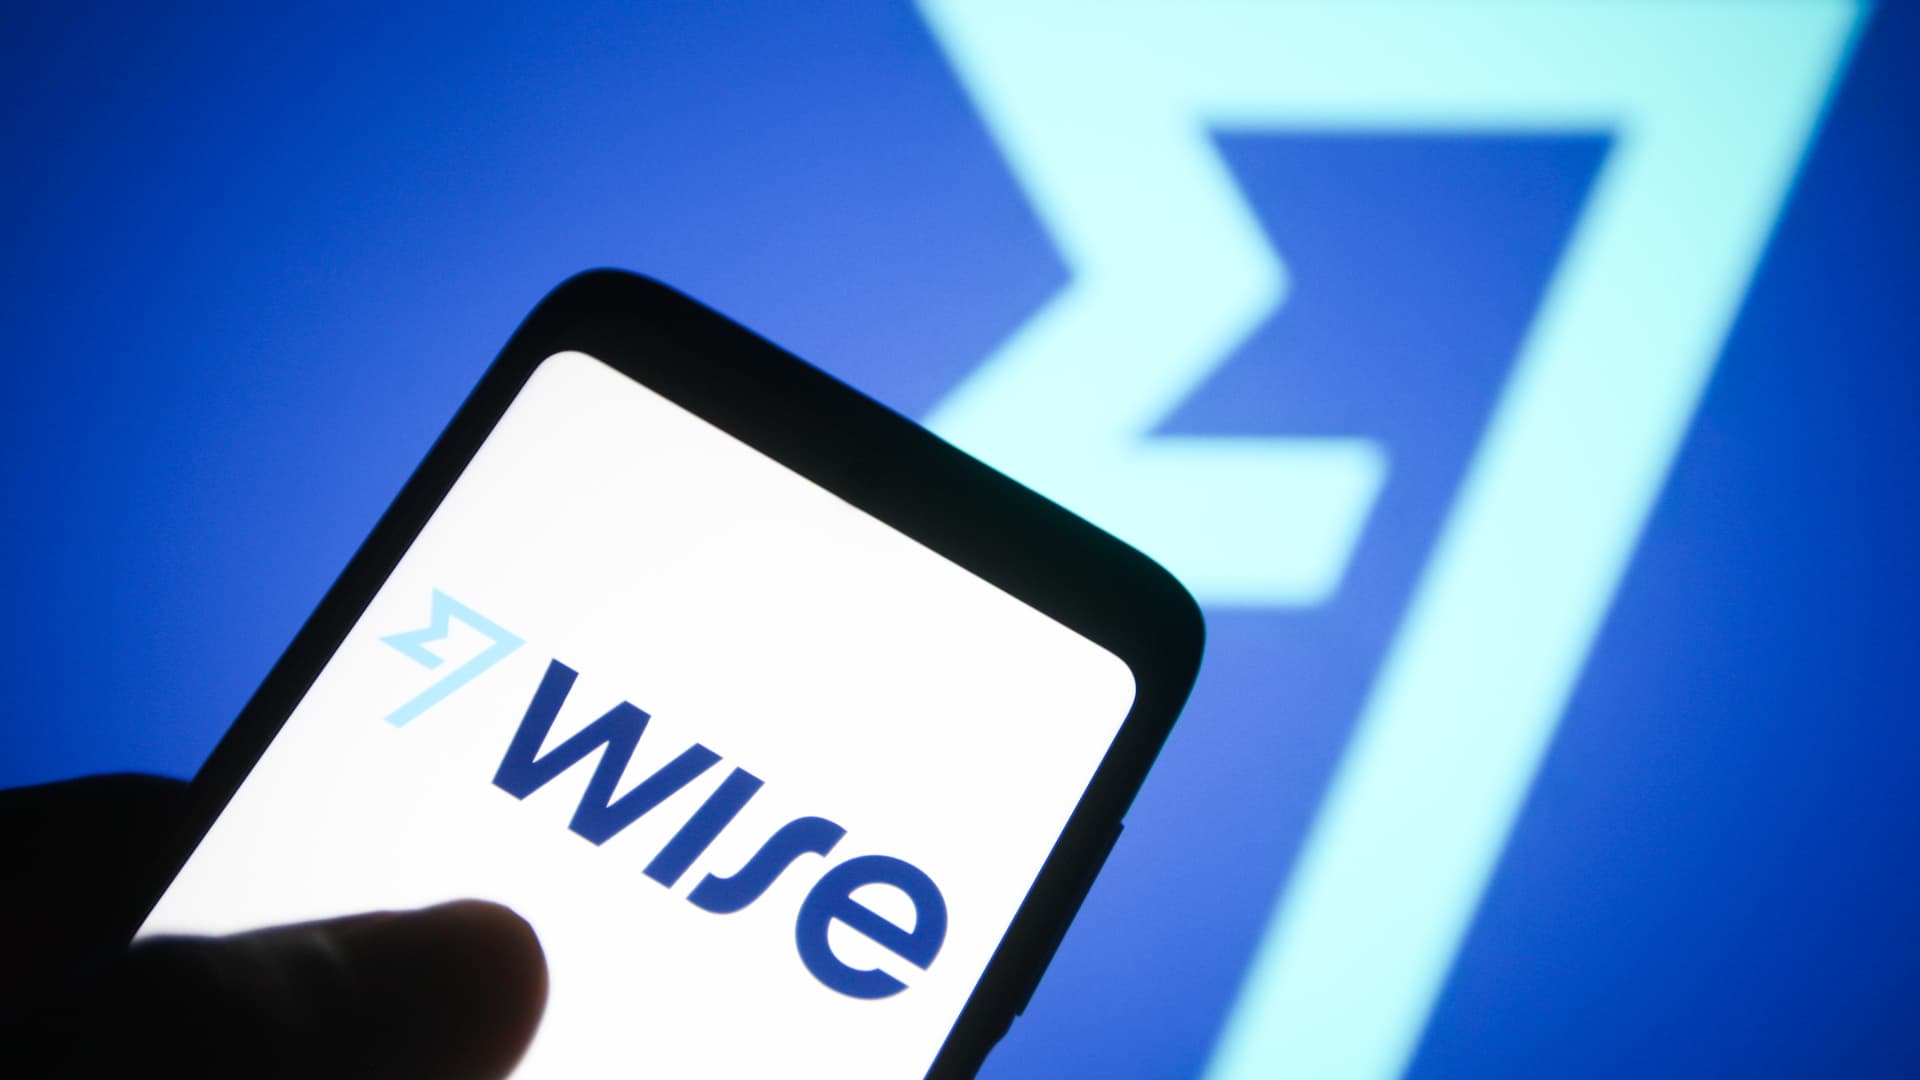 The Wise logo displayed on a smartphone screen.